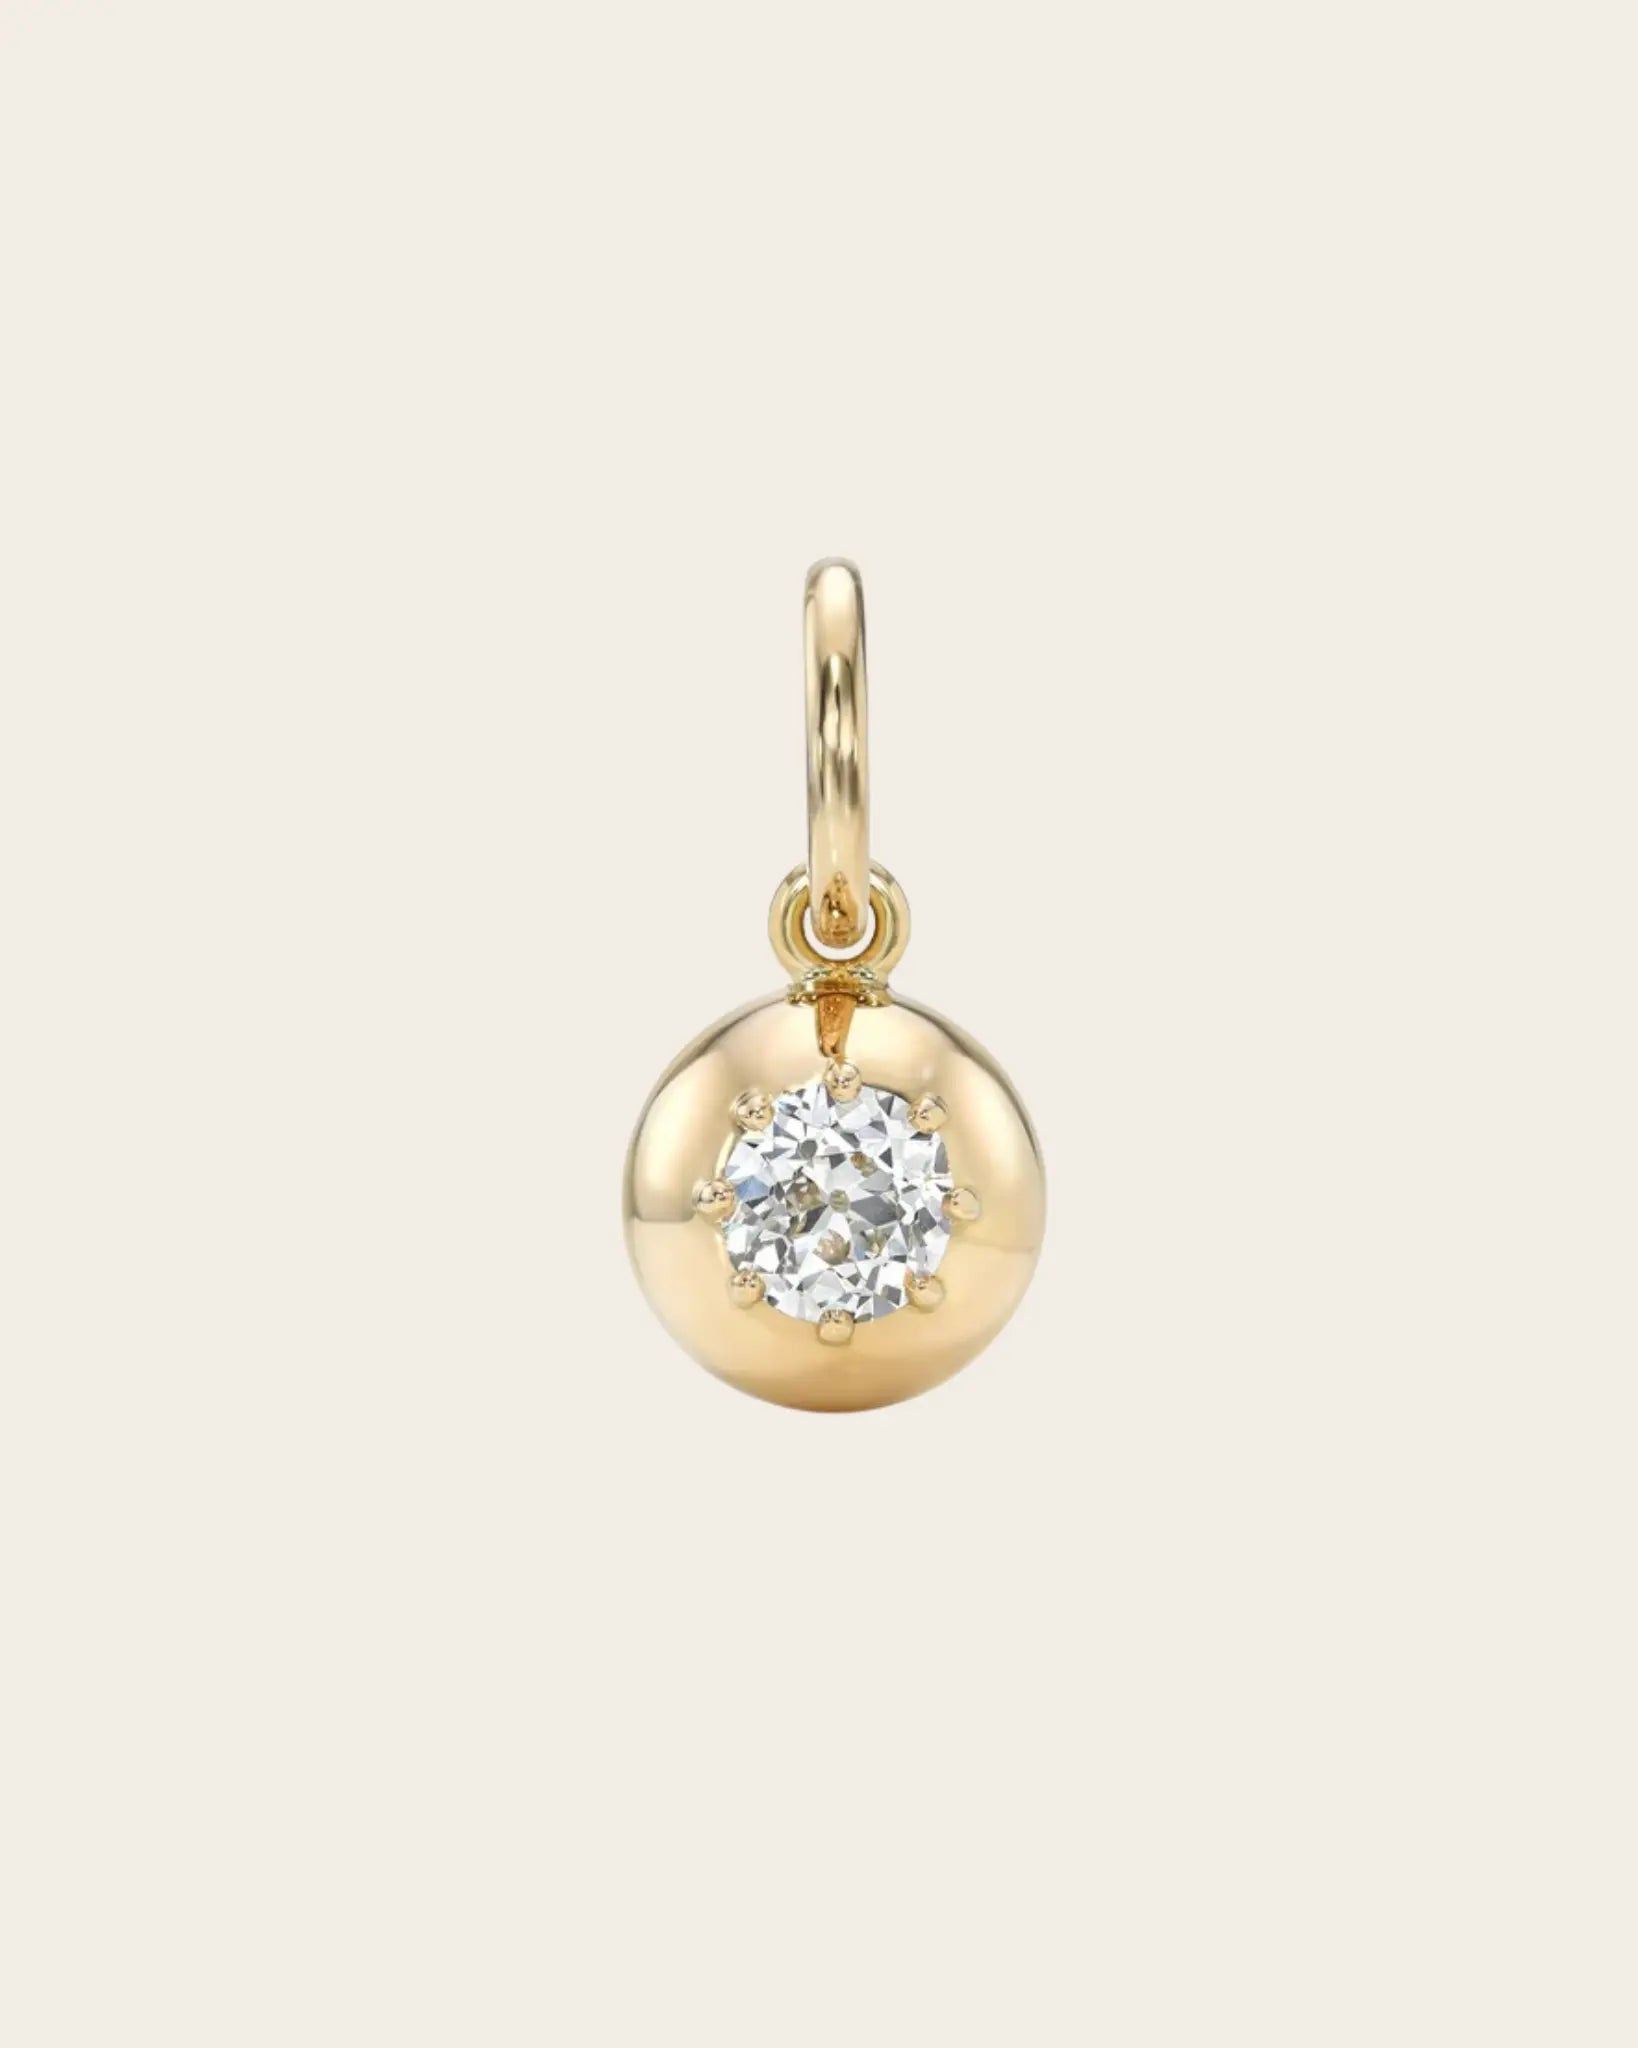 A gold and diamond pendant by Single Stone